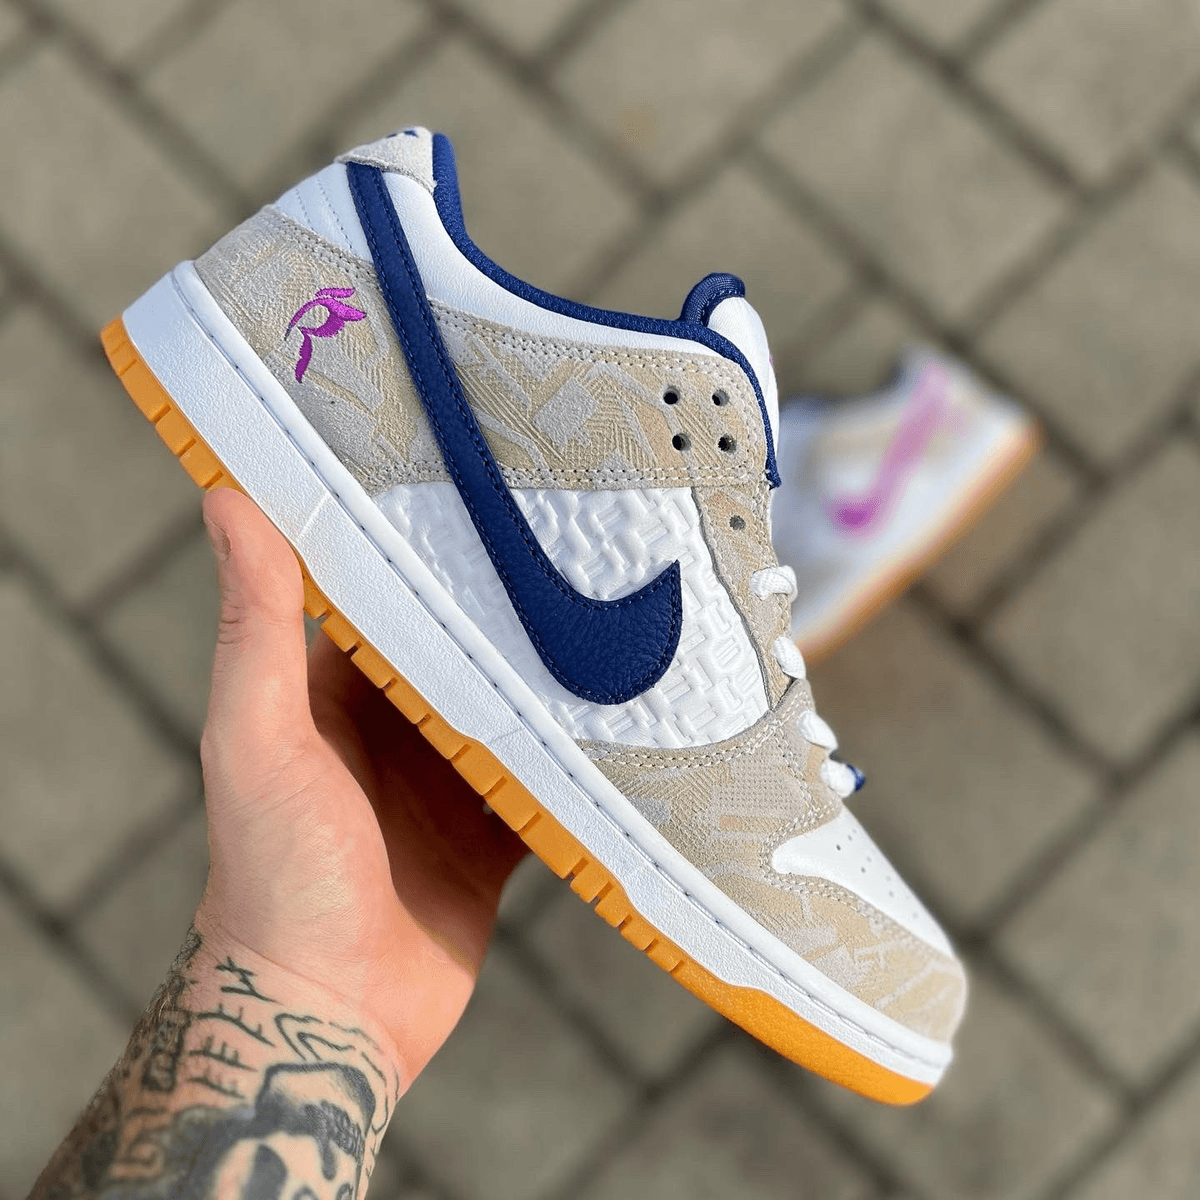 Close Up Look At The Rayssa Leal x Nike SB Dunk Low